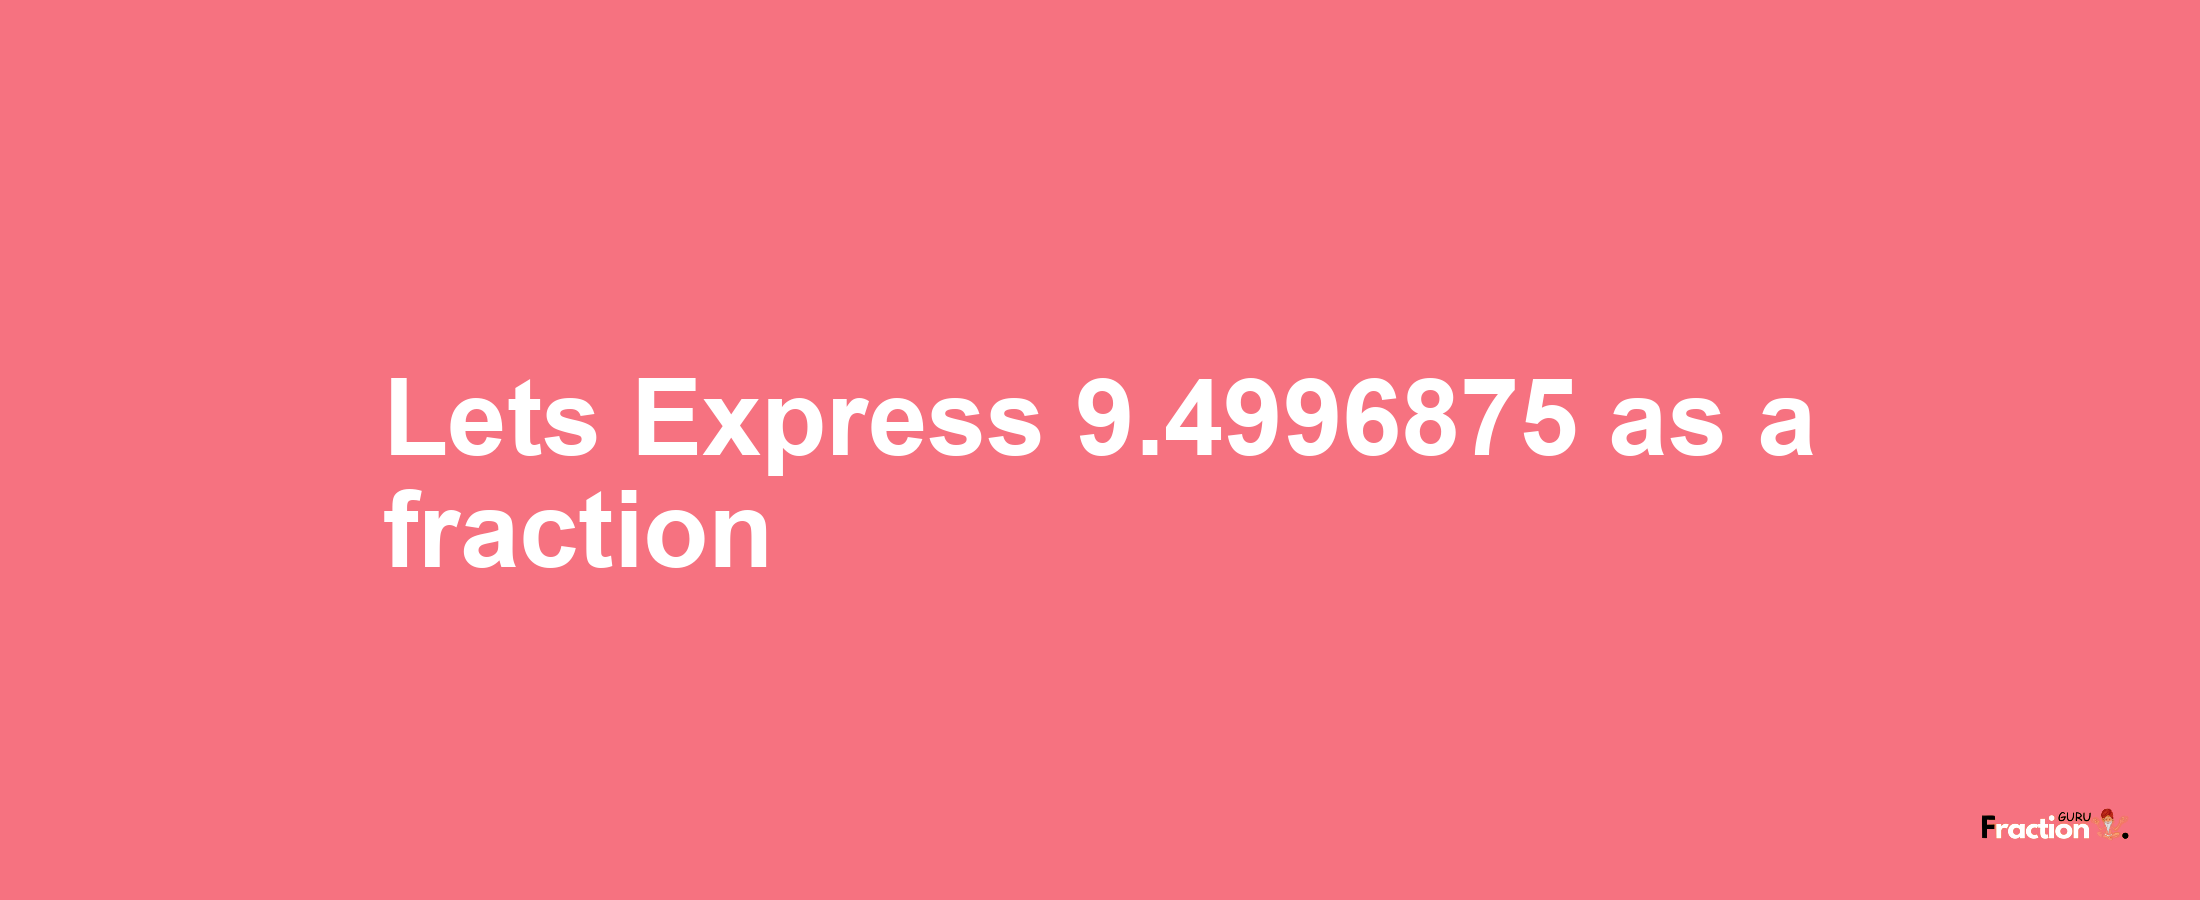 Lets Express 9.4996875 as afraction